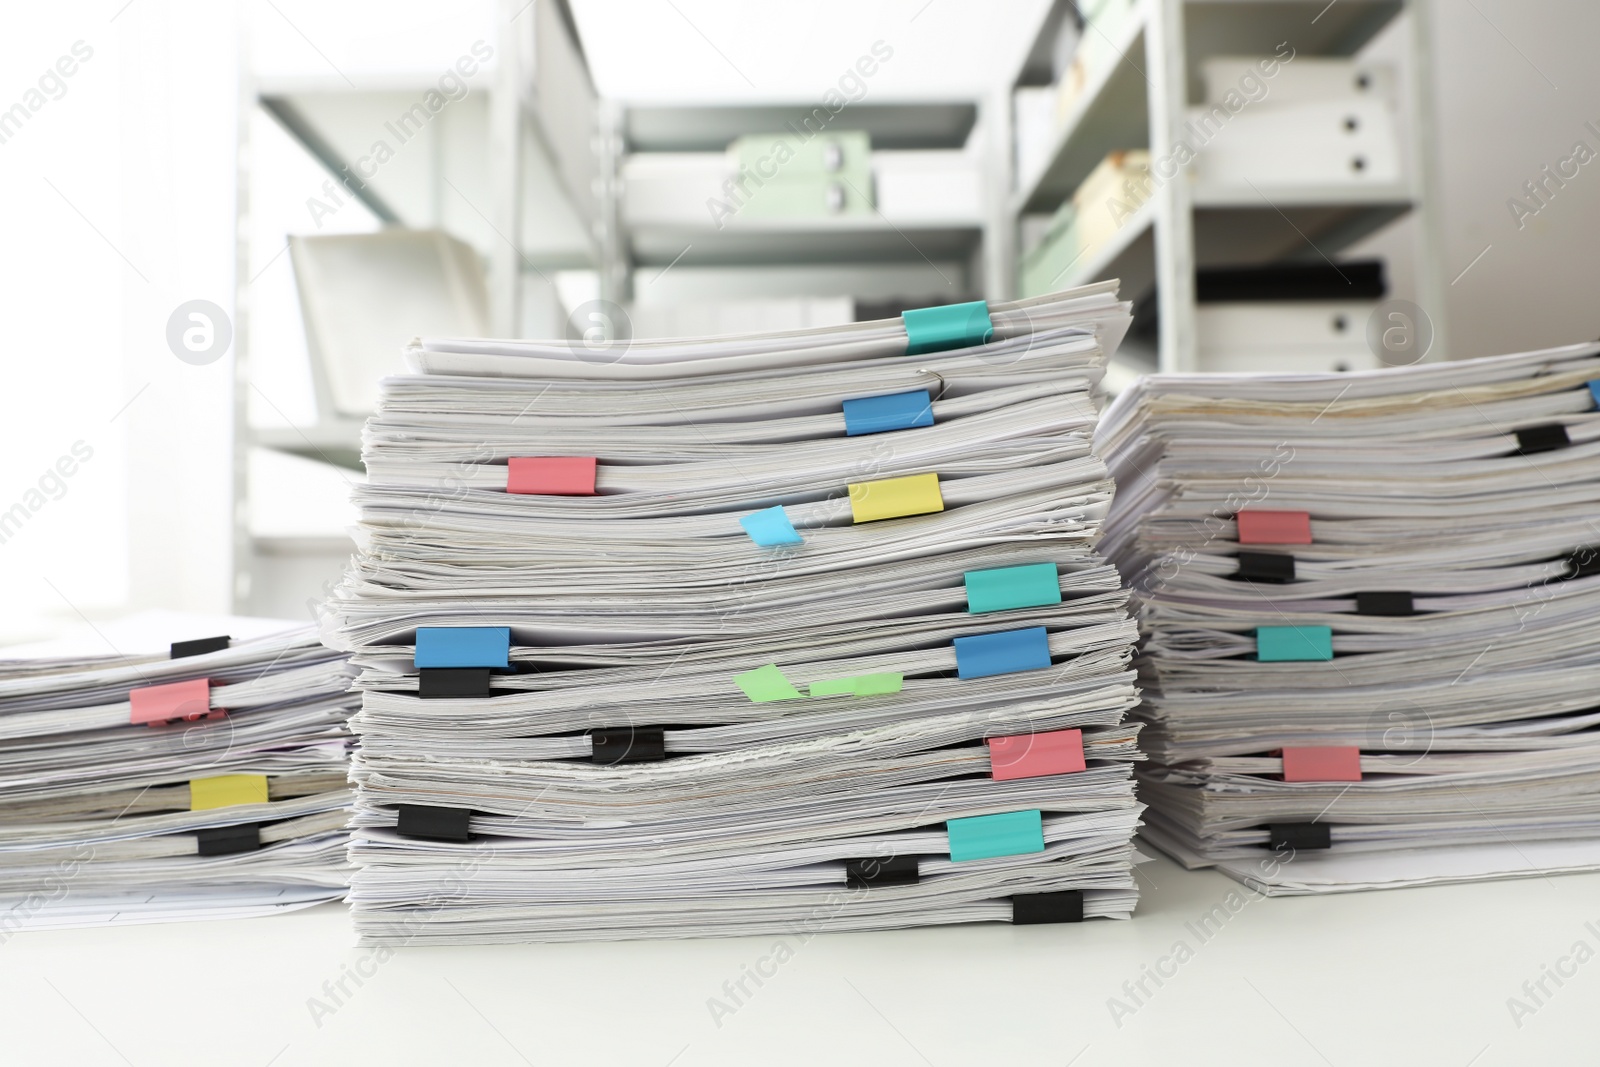 Photo of Stacks of documents with paper clips on office desk